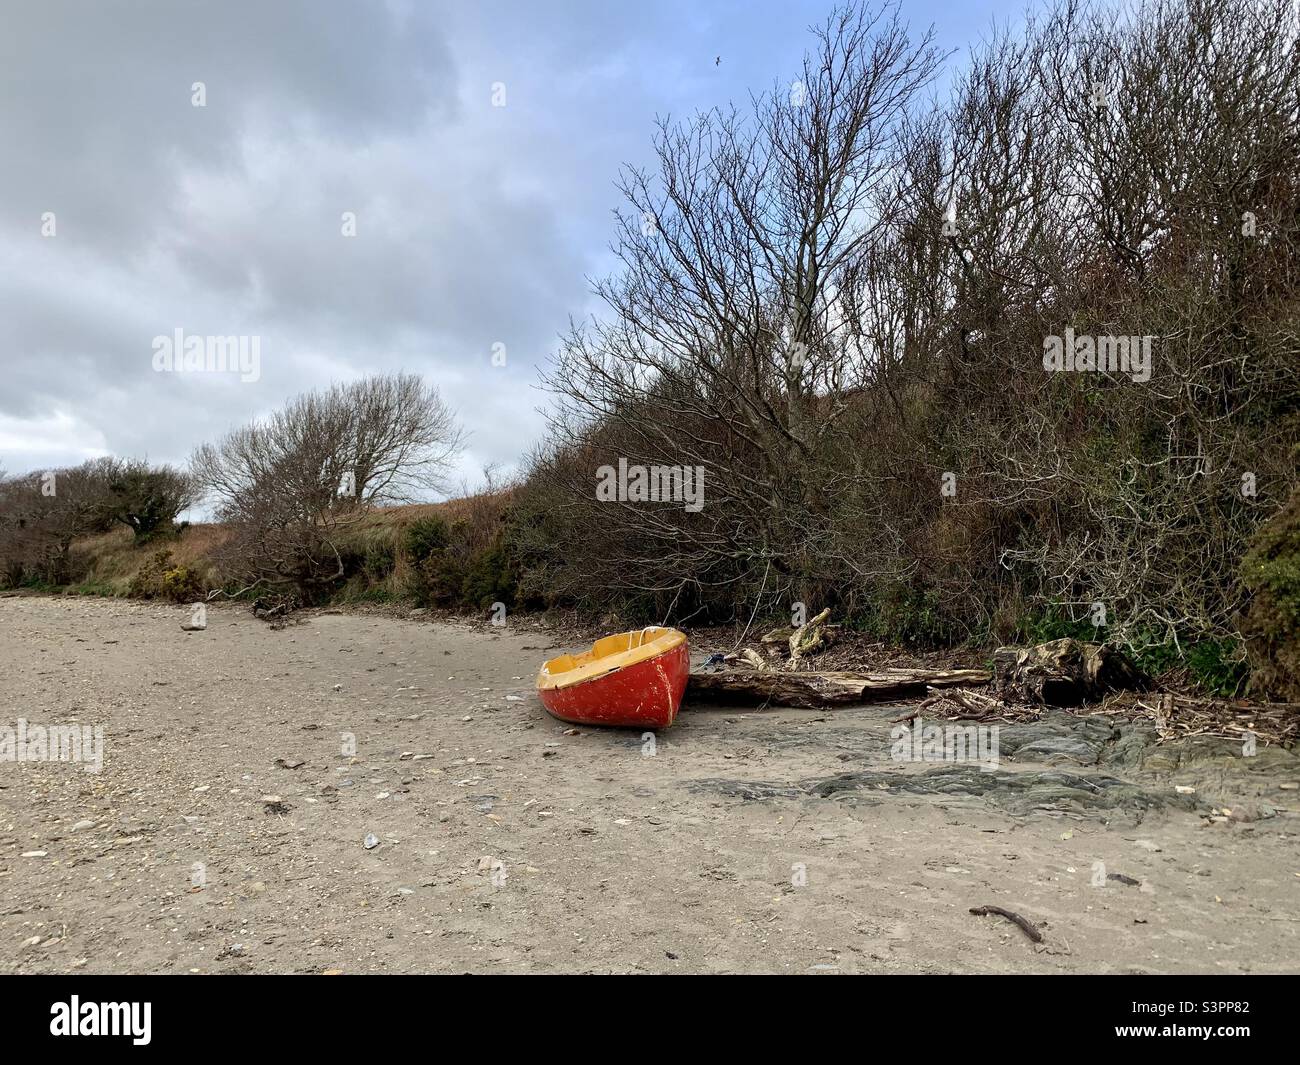 Small red dinghy boat washed up on beach Stock Photo